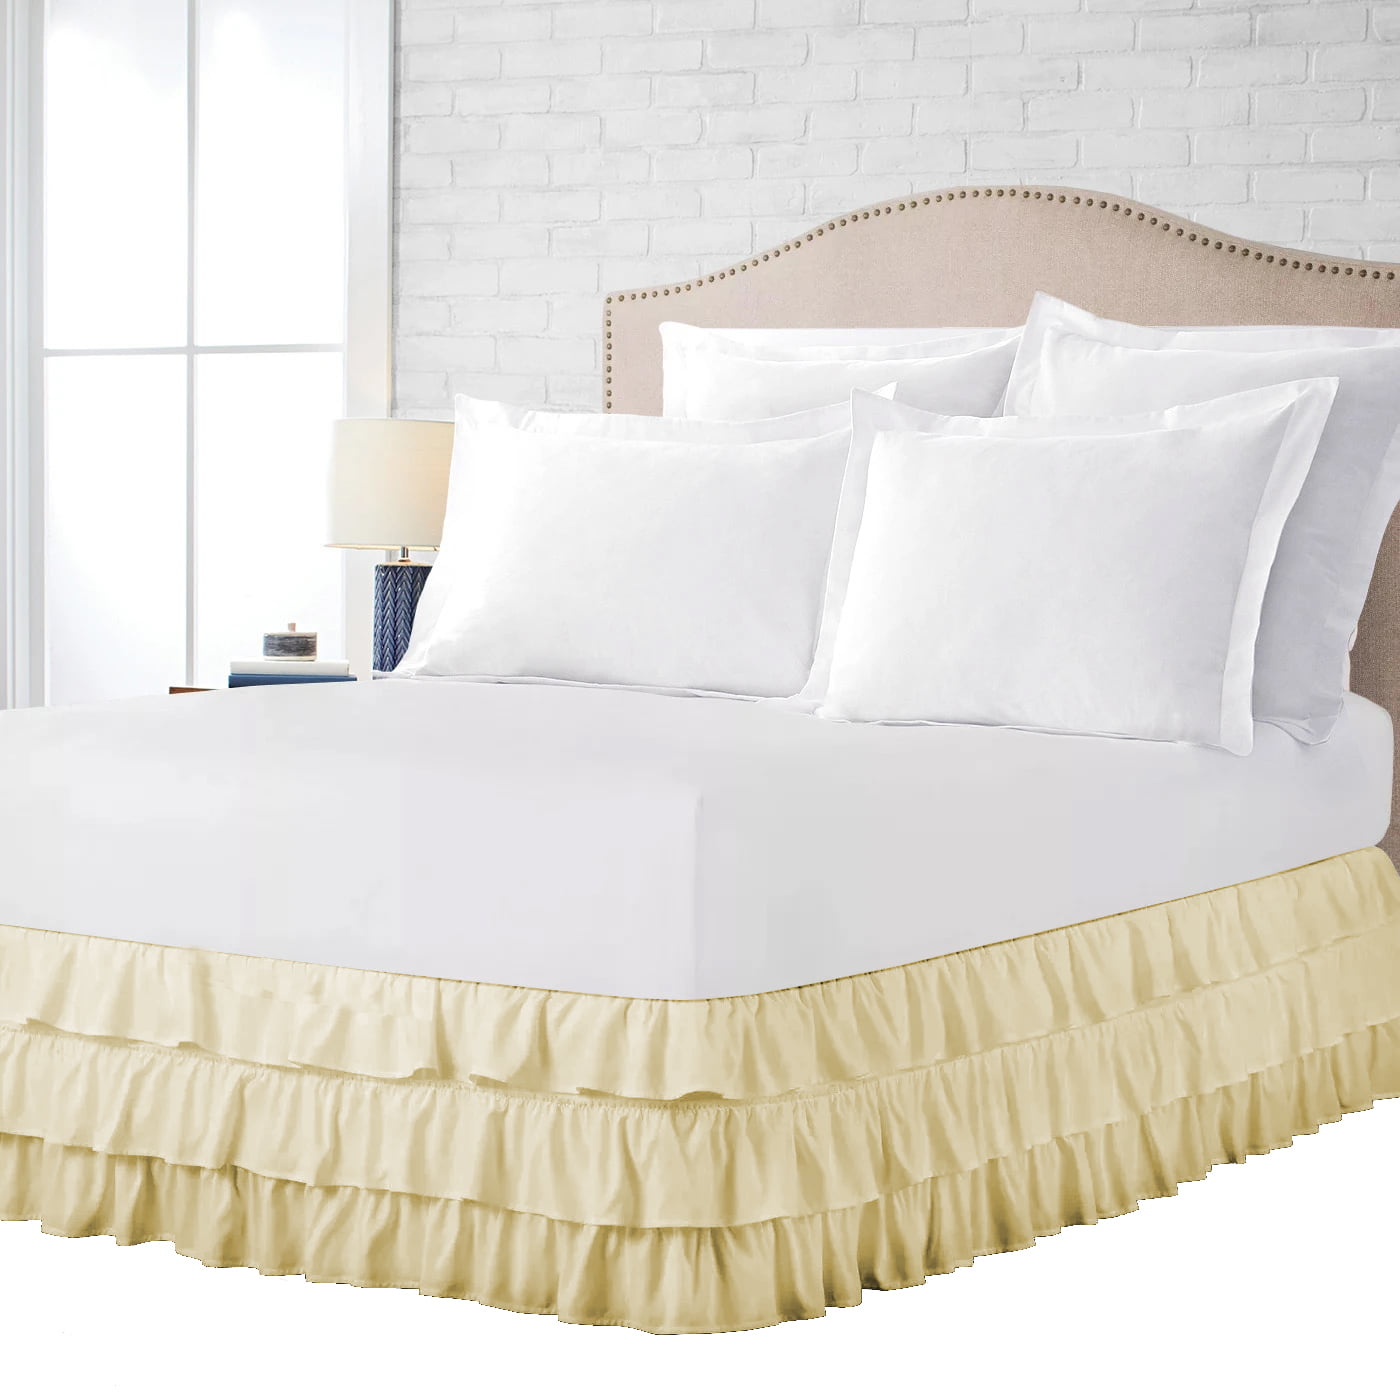 1 PC Multi Ruffle Bed Skirt 1000 TC New Egyptian Cotton King Size & Solid Colors 